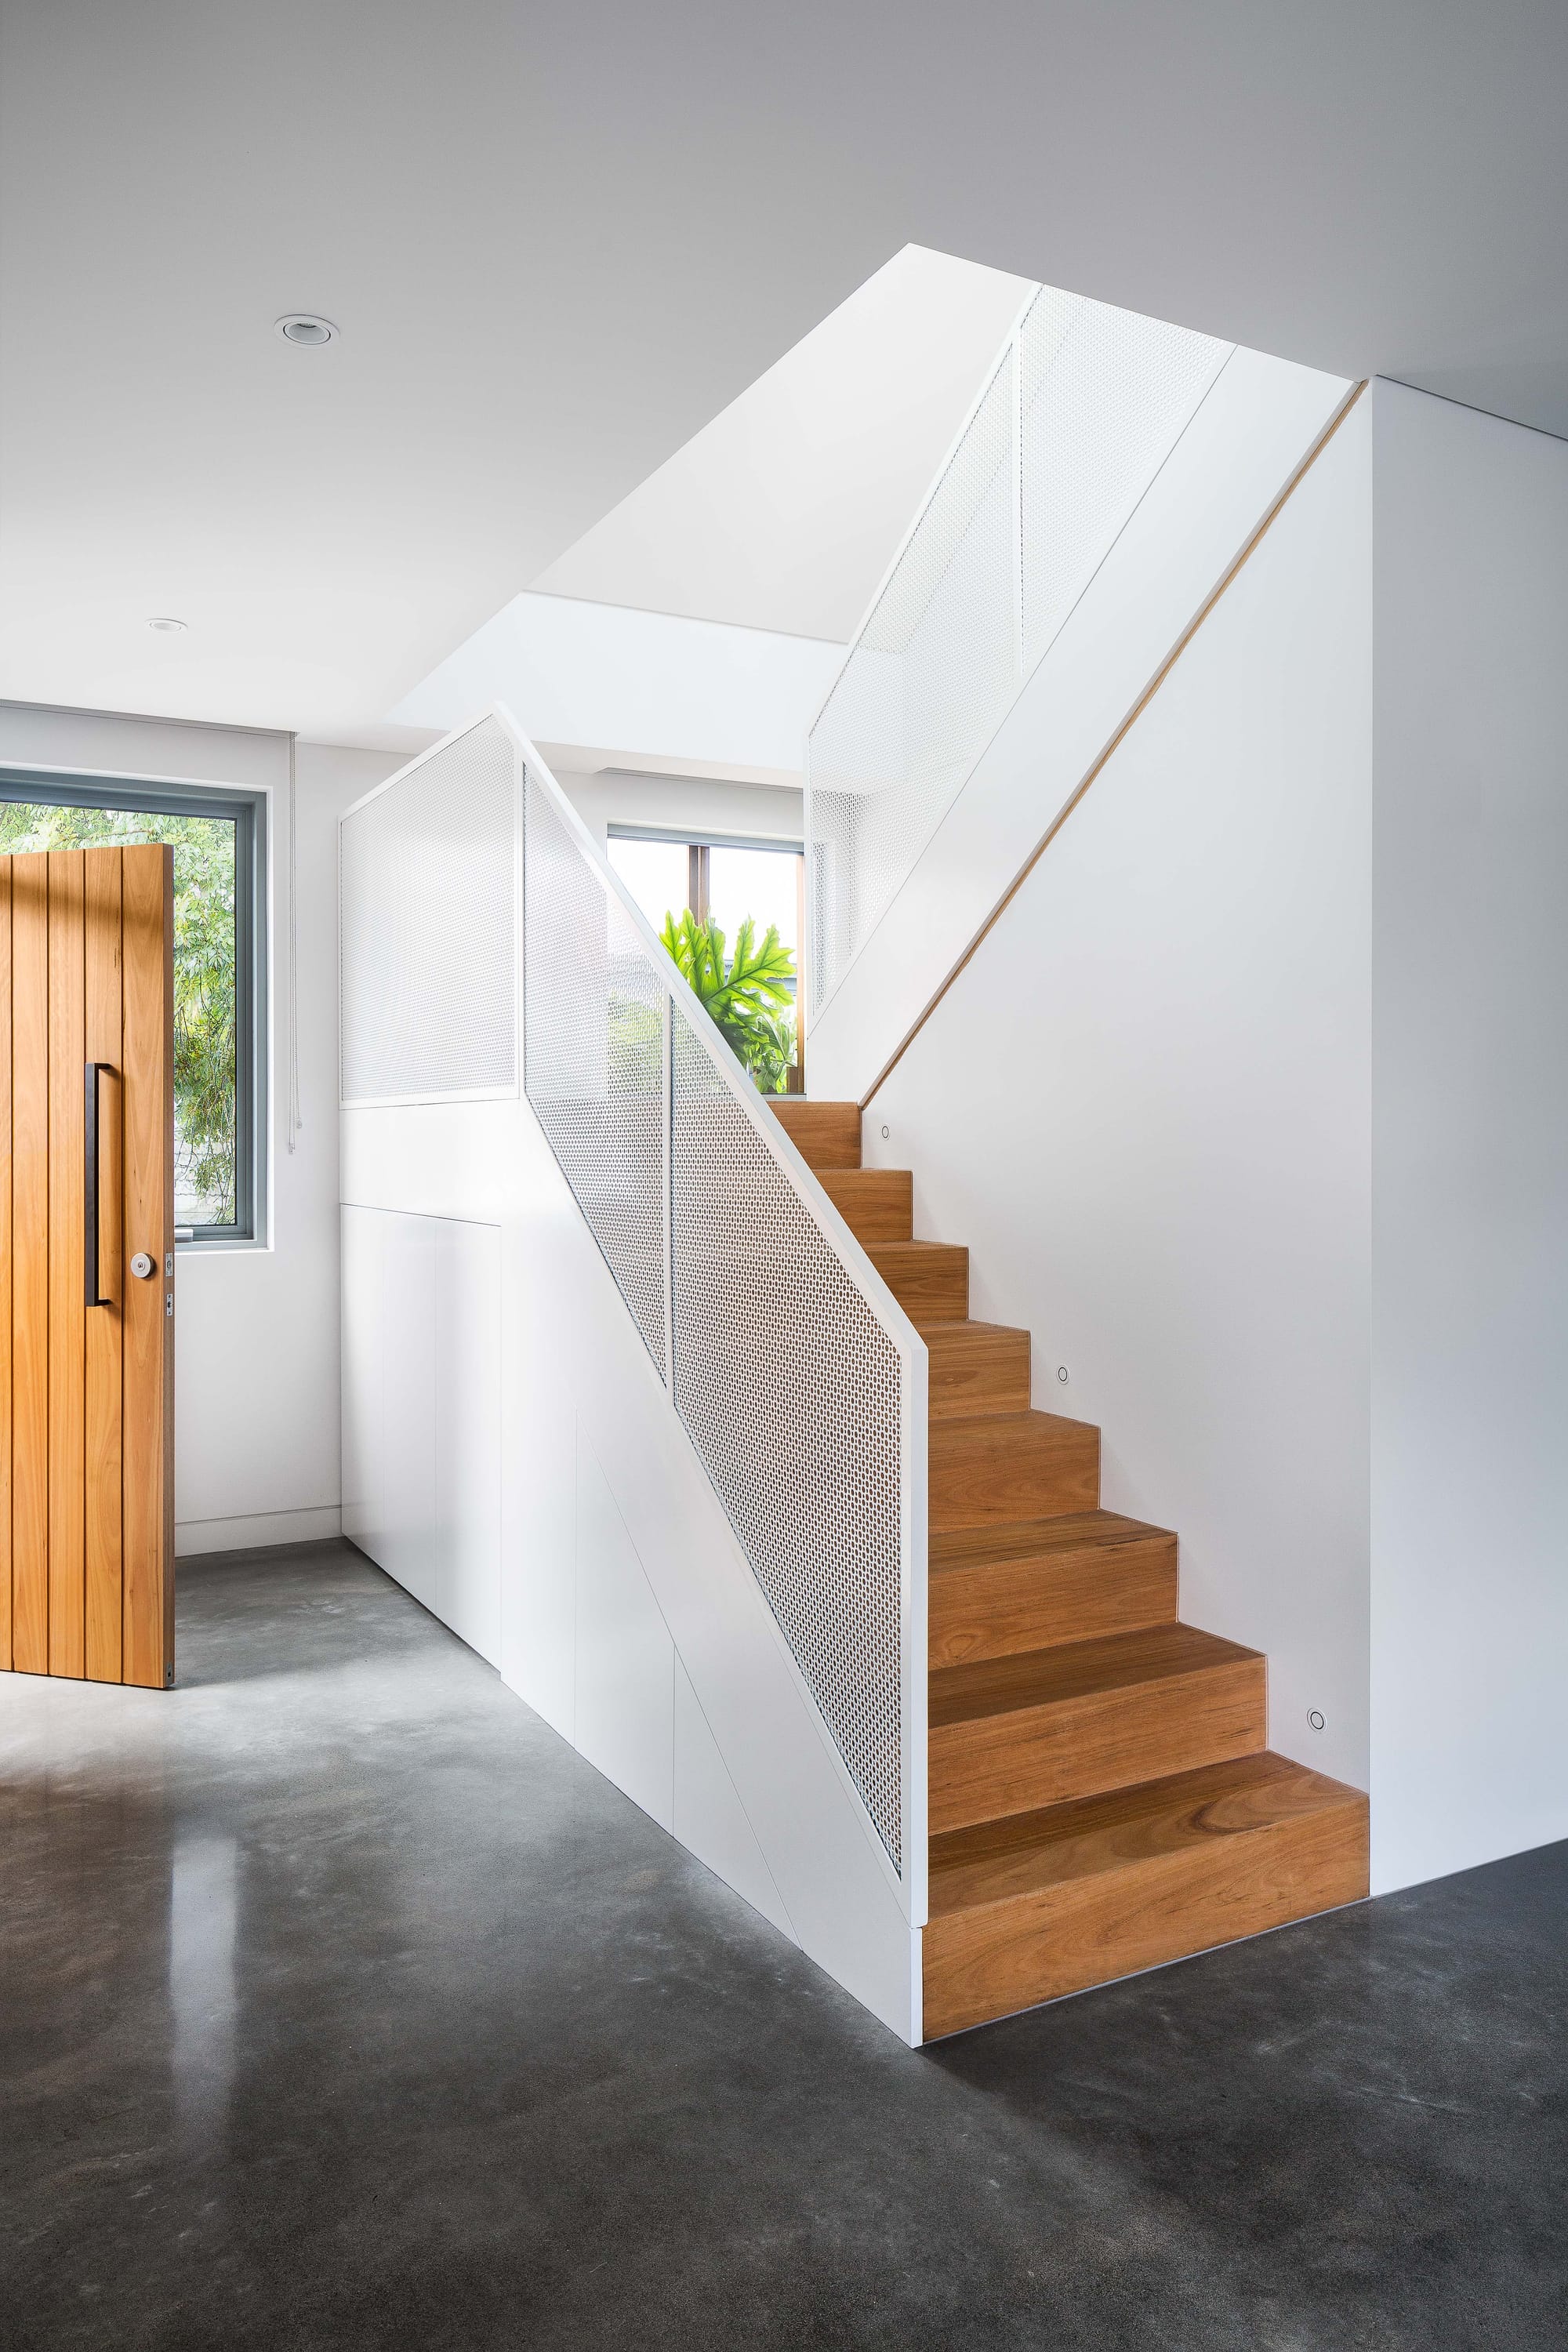 Cremorne House by Trethowan. Photography by Emily Bartlett. Timber staircase with white perforated metal balustrade. Polished concrete floor, white walls and timber door.